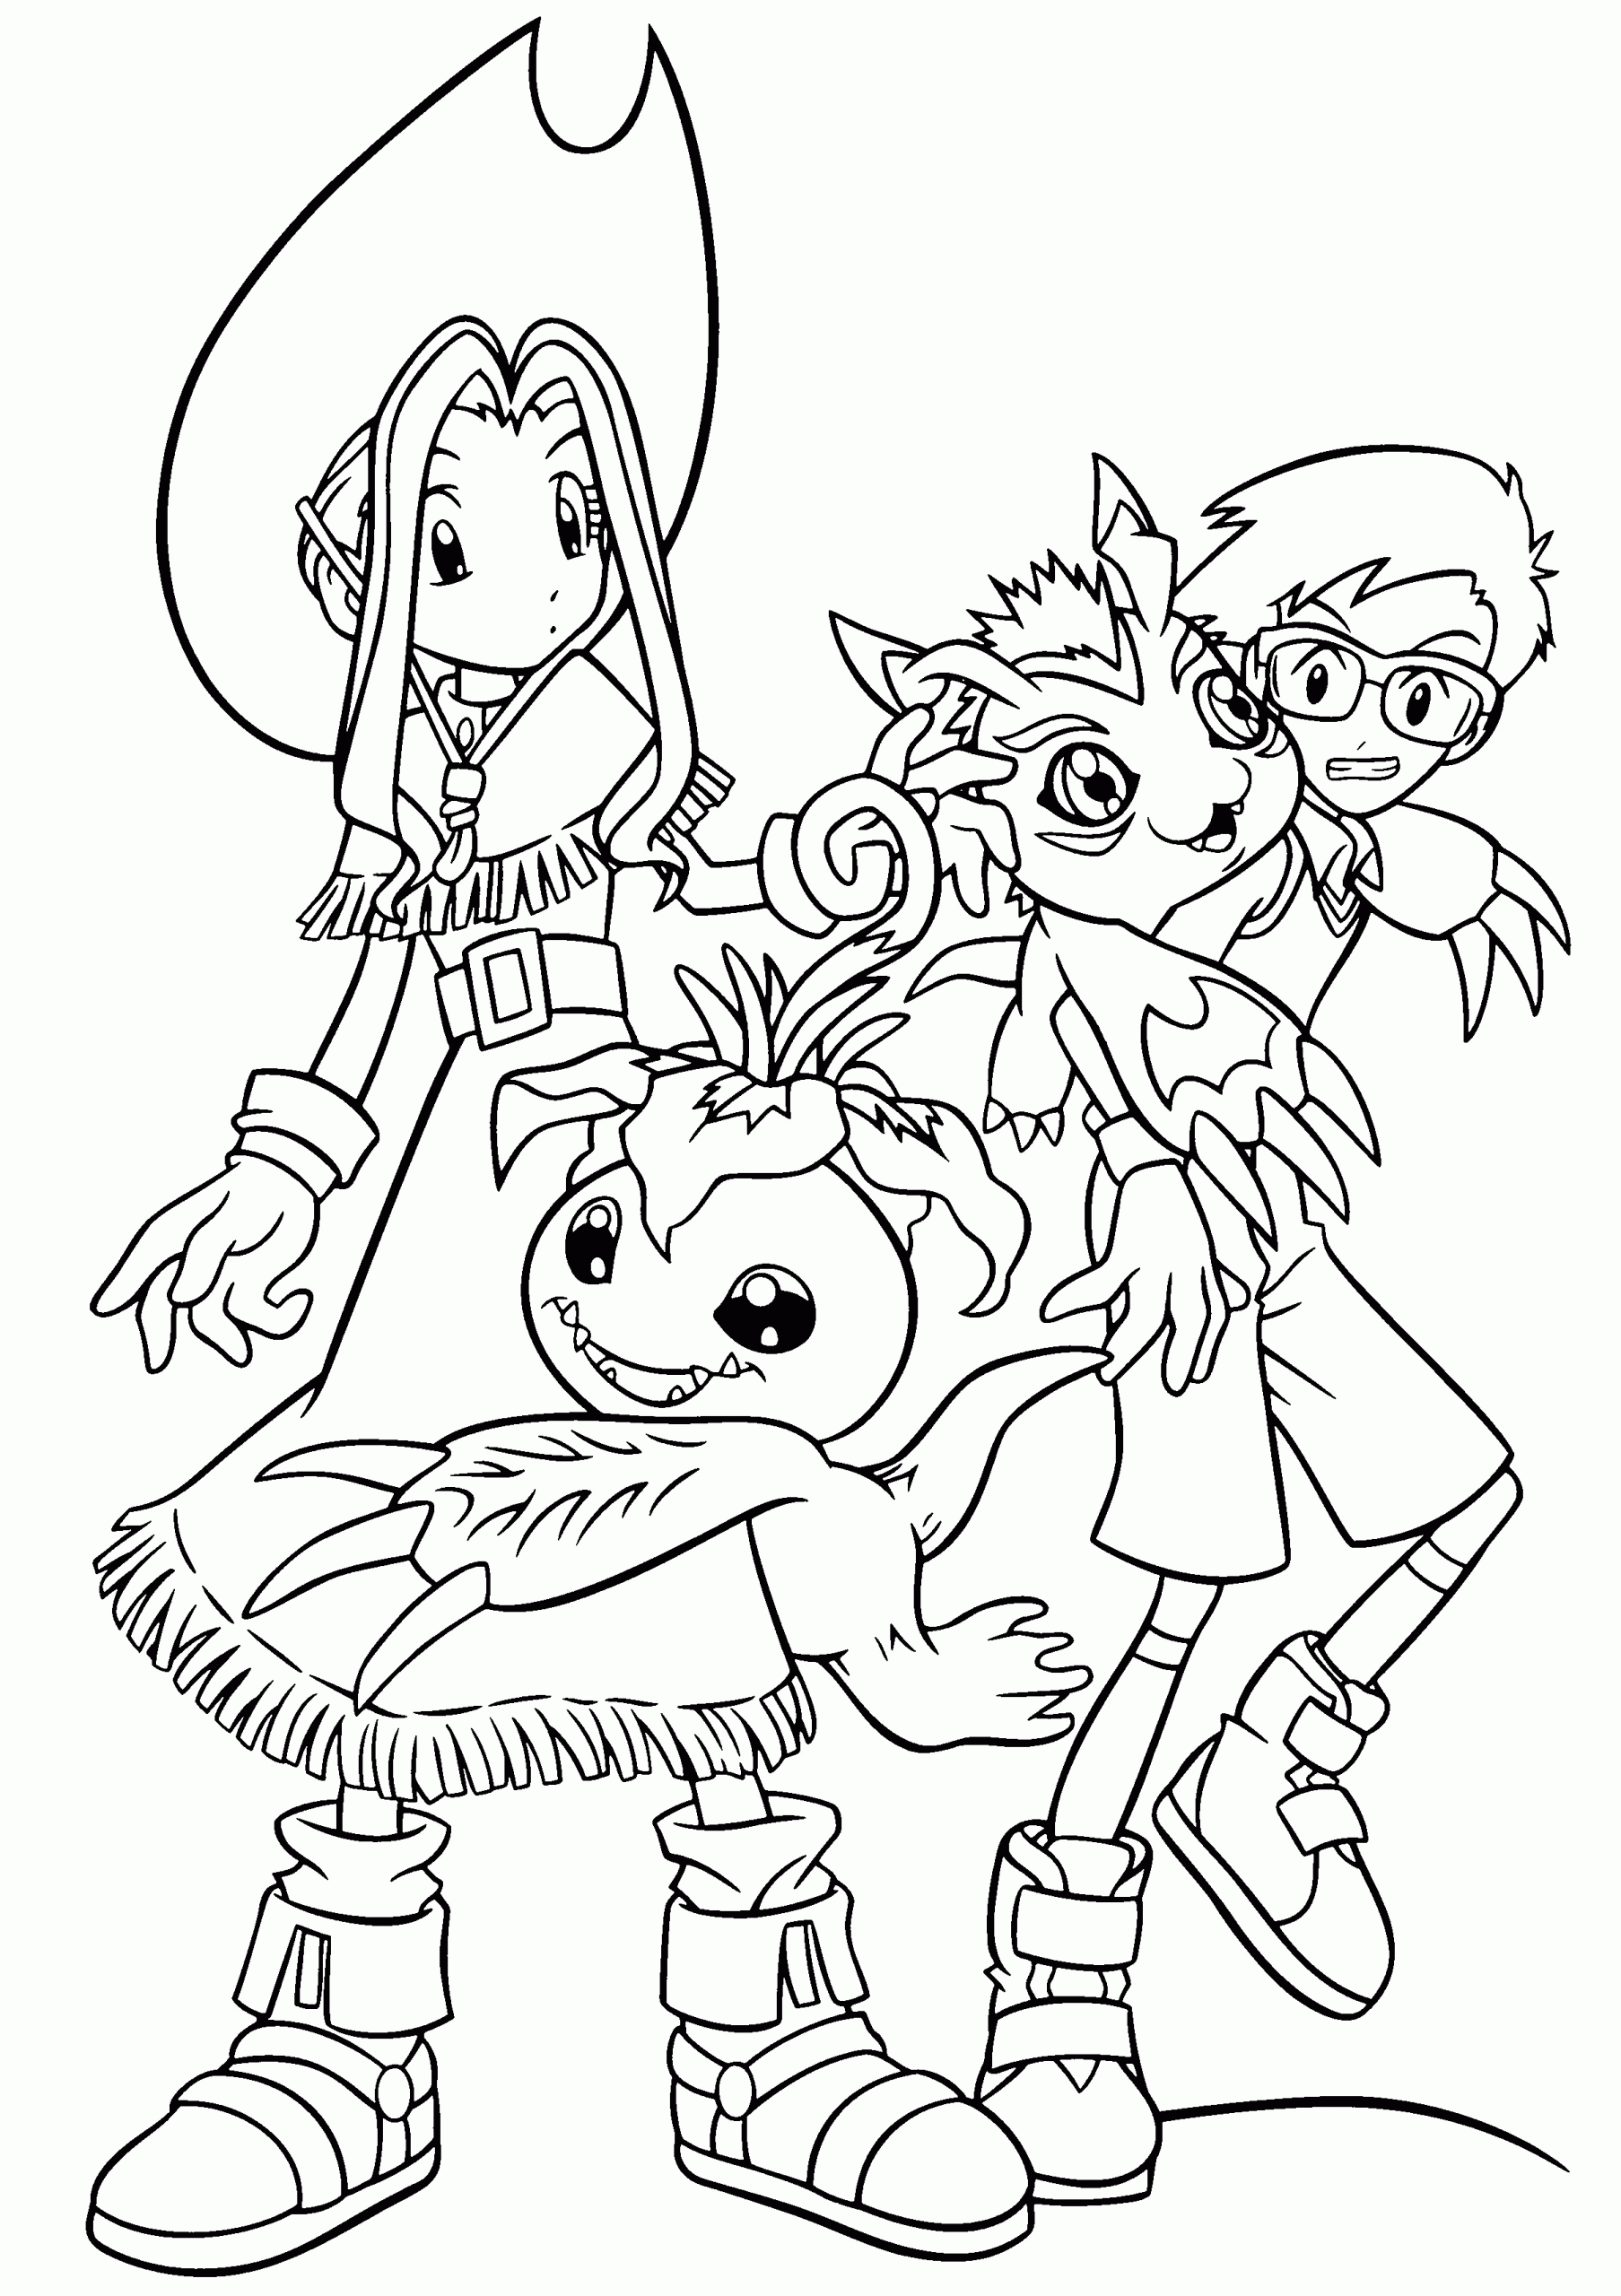 Kids Printable Coloring Pages
 Free Printable Digimon Coloring Pages For Kids